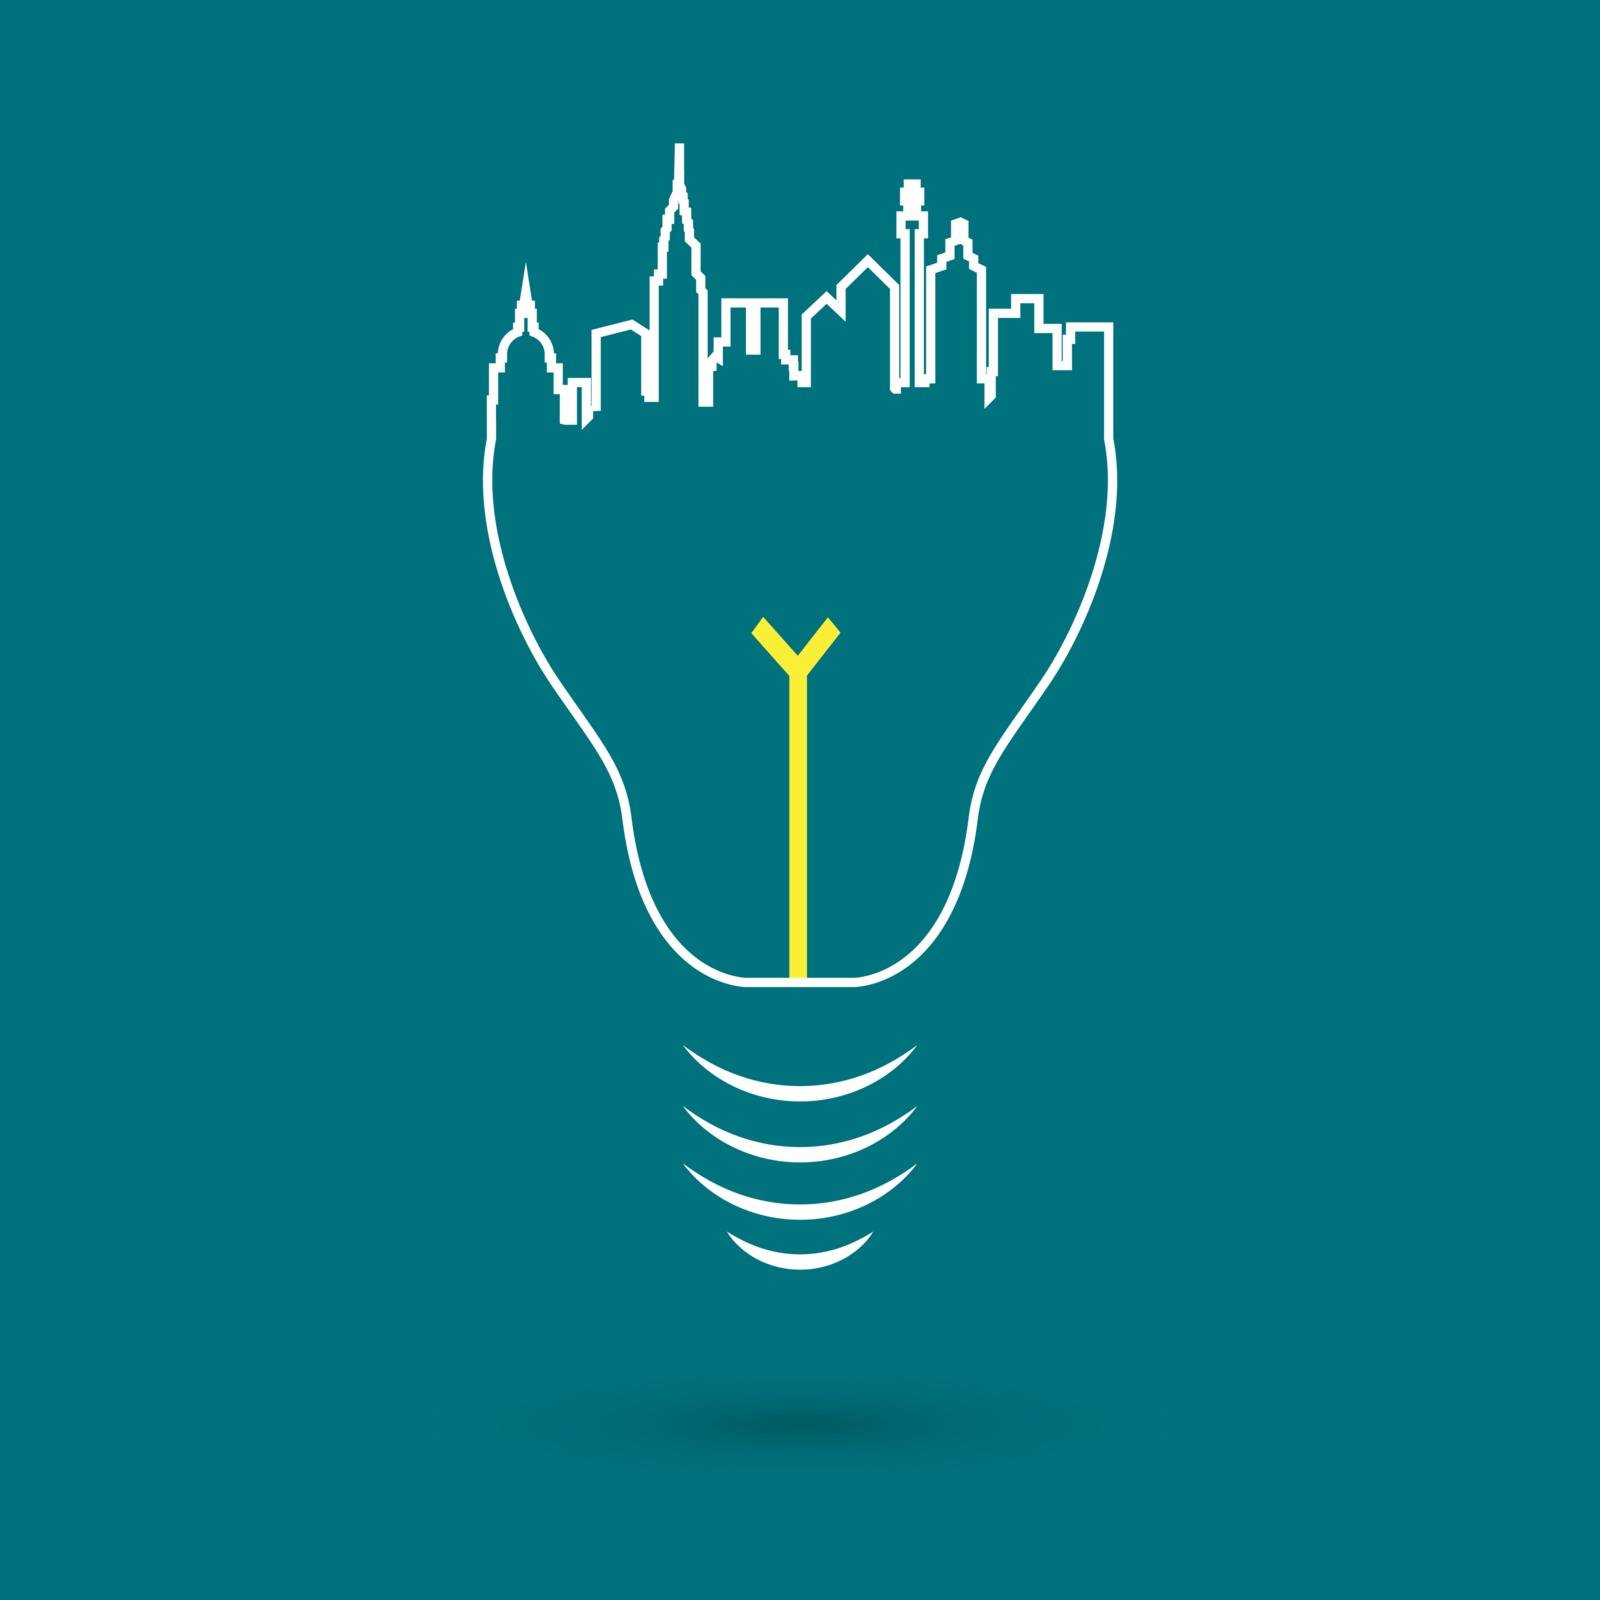 City bulb by Coline